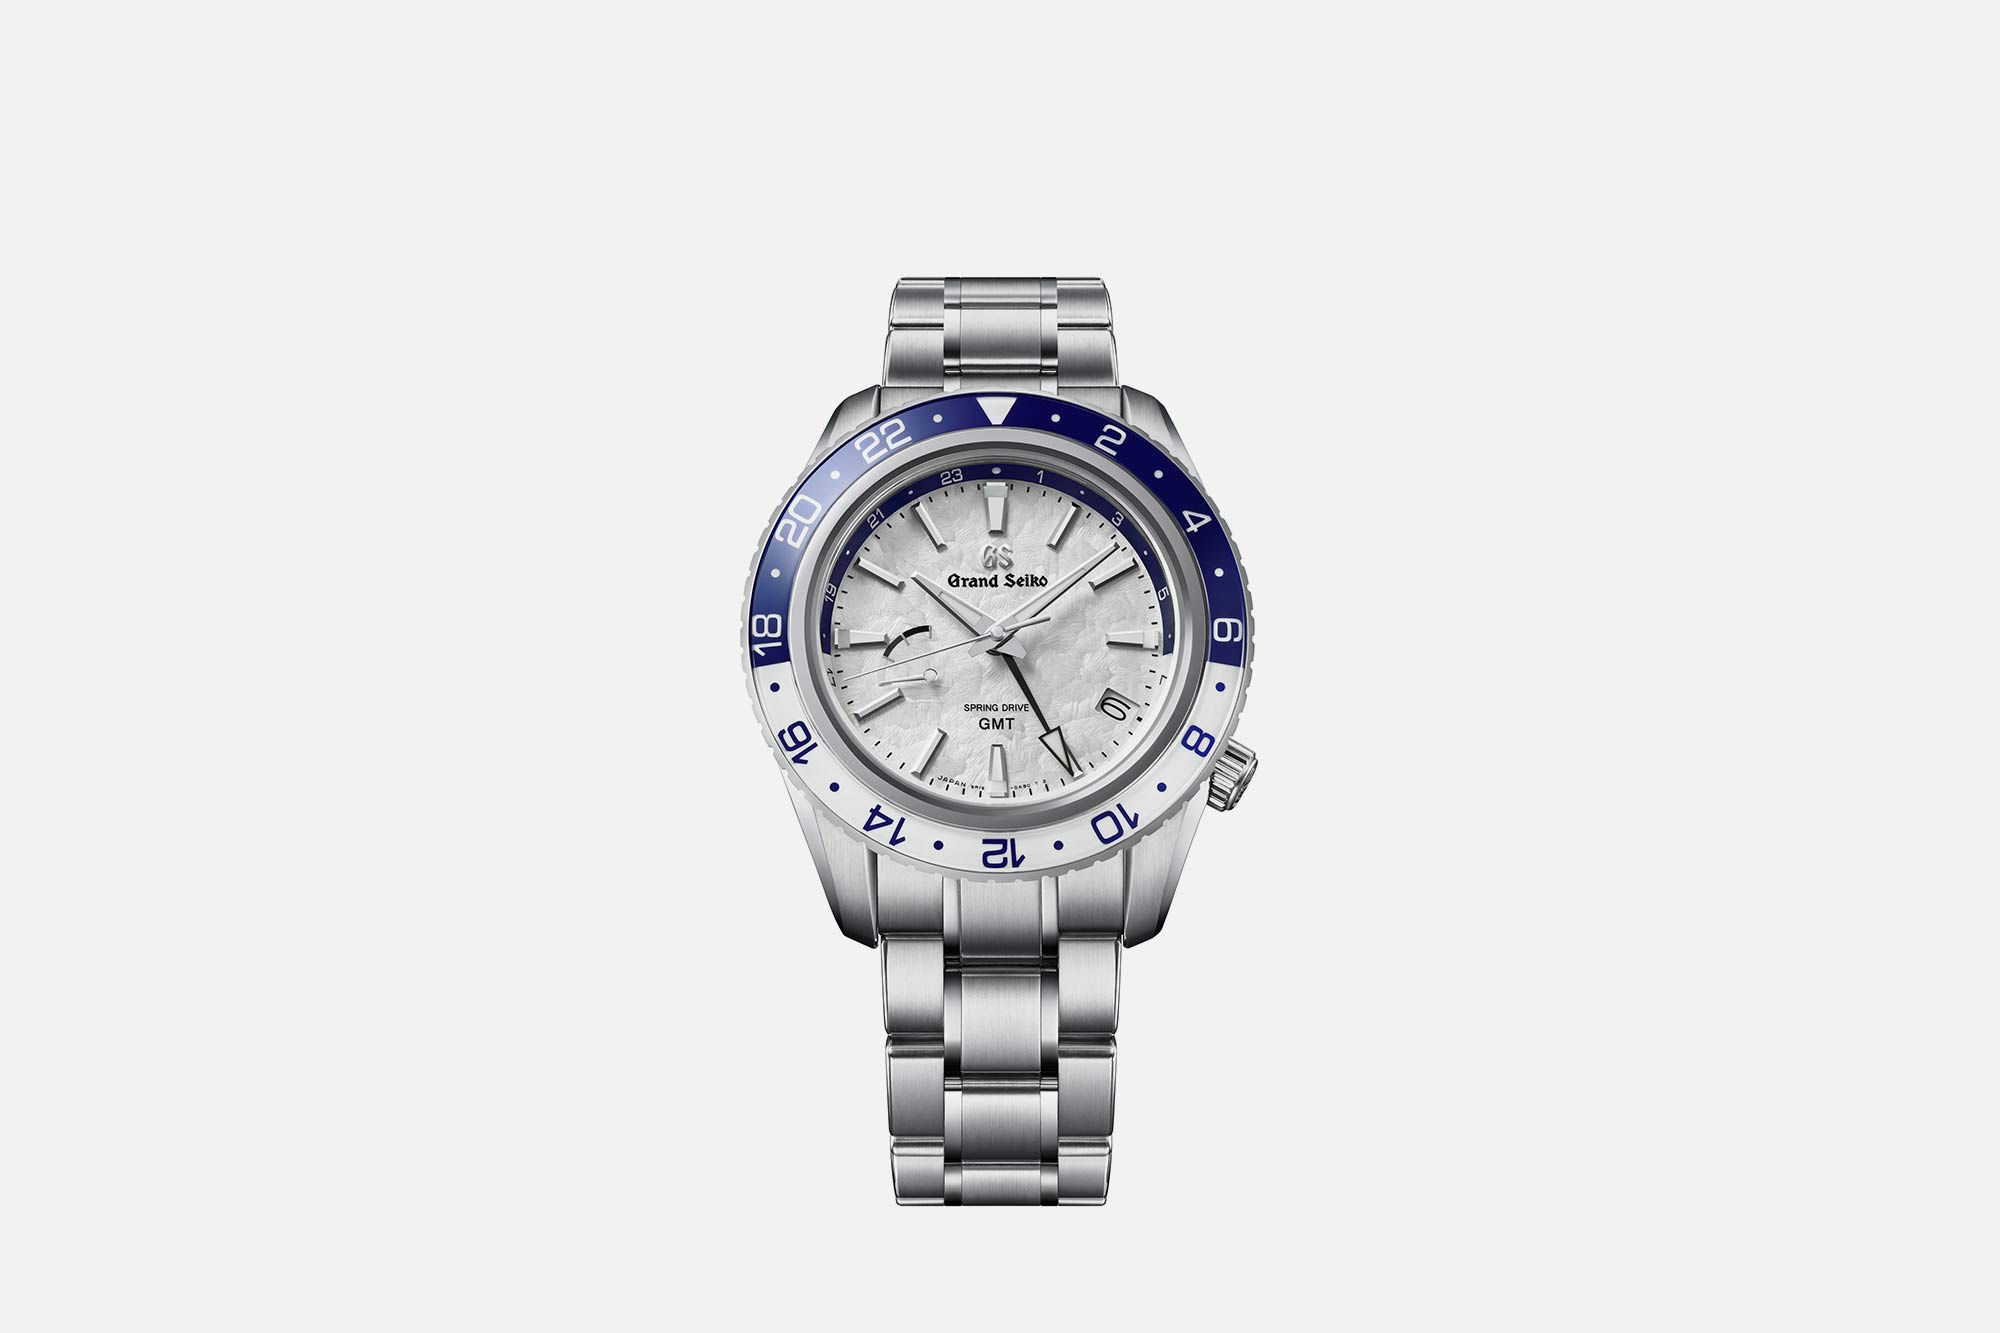 Grand Seiko Celebrates Twenty Years of their GMT with a New Limited Edition